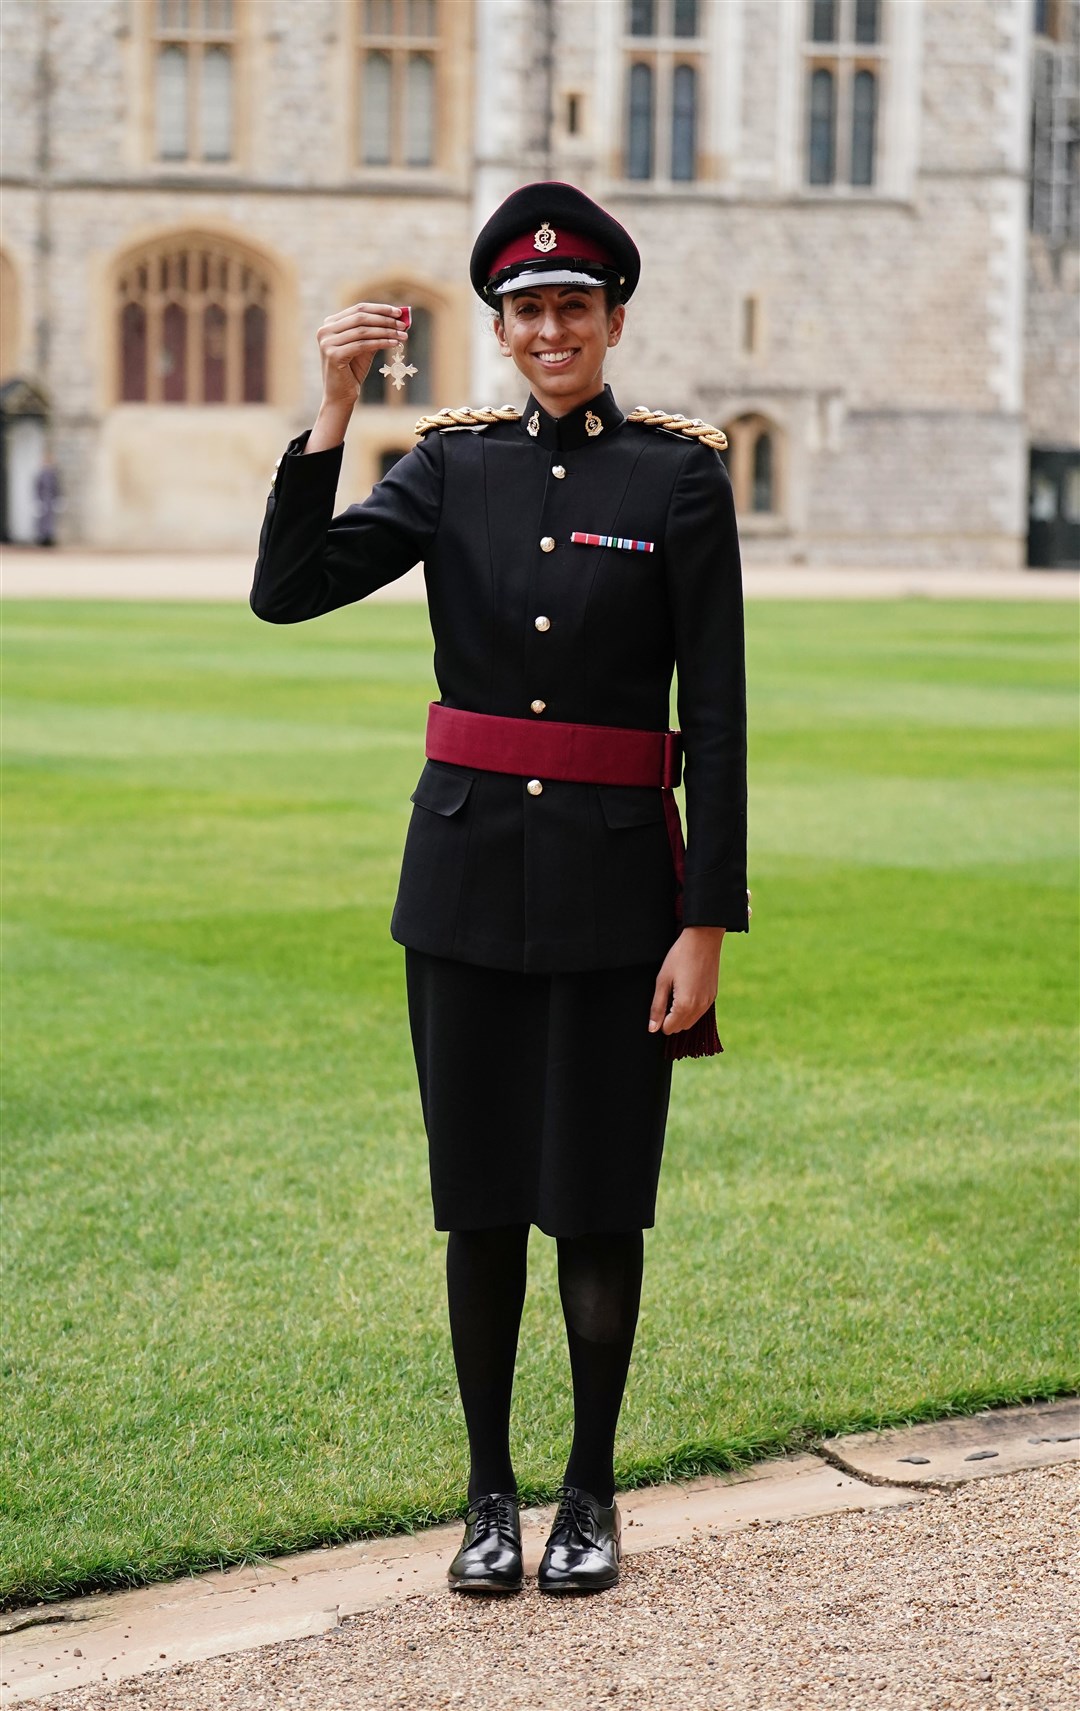 Captain Preet Chandi after being made an MBE (Member of the Order of the British Empire) during an investiture ceremony at Windsor Castle (Jordan Pettitt/PA)